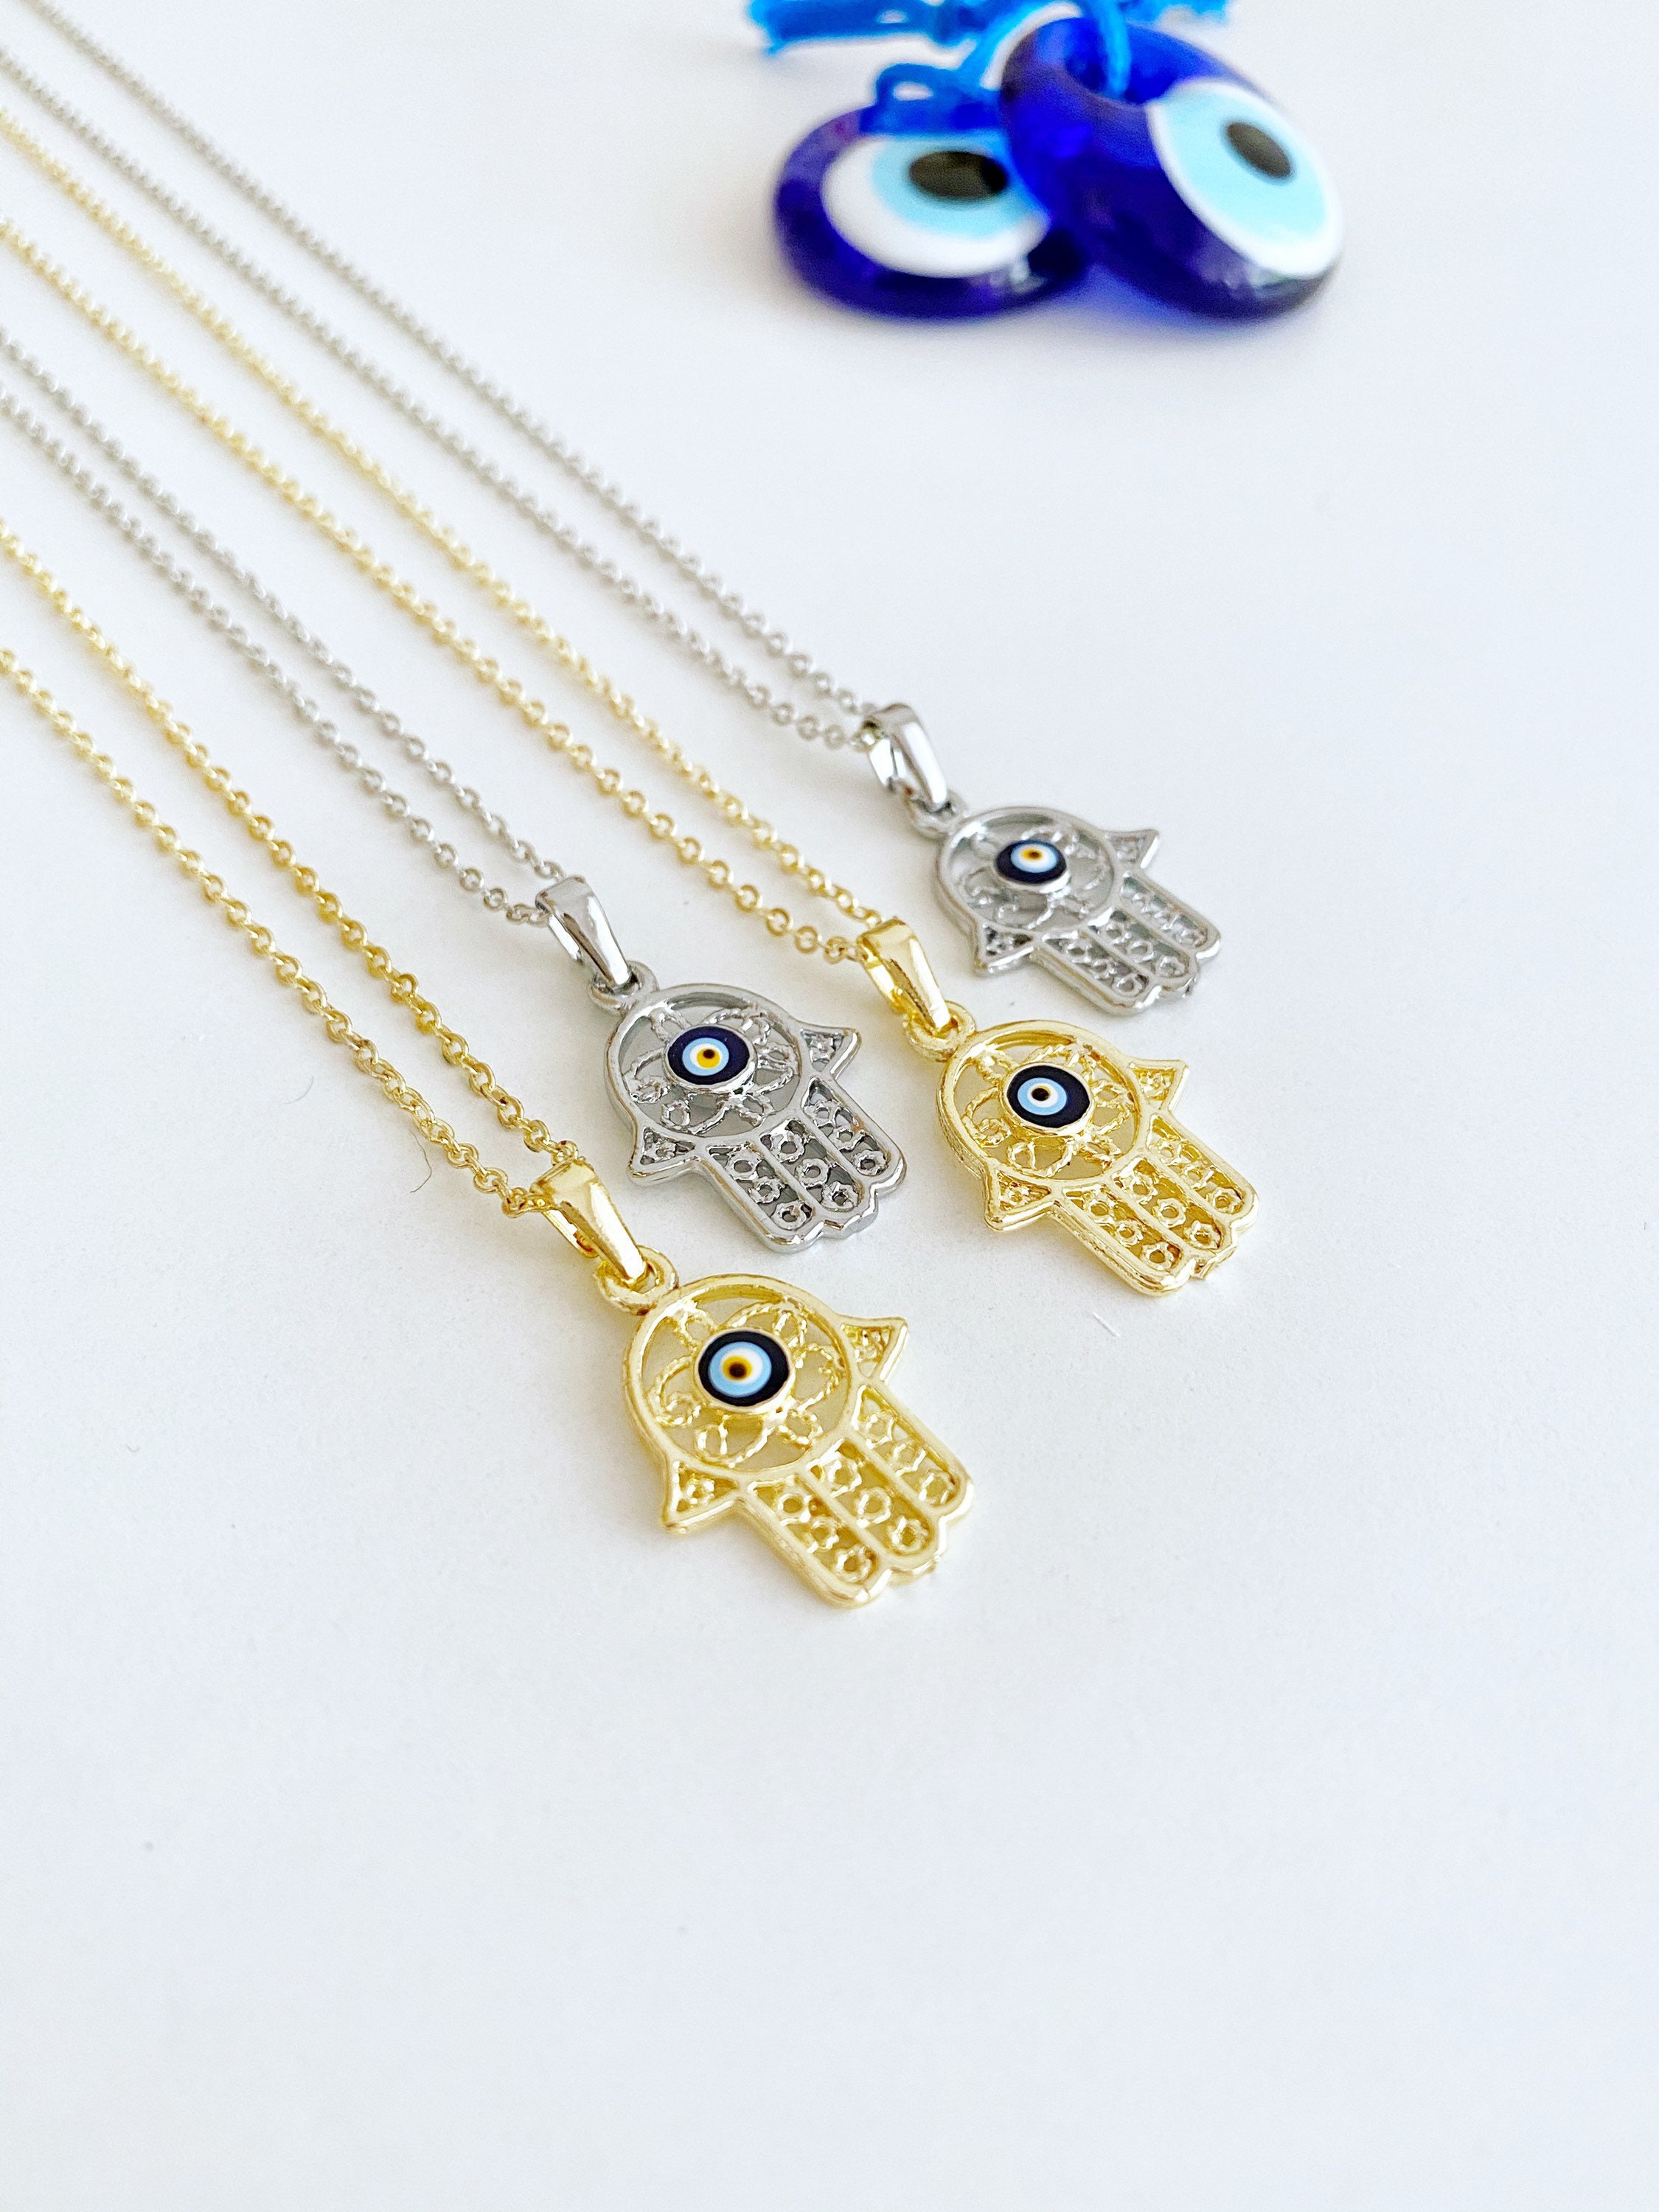 Intricate Hamsa and Evil Eye Necklace in Blue and Gold